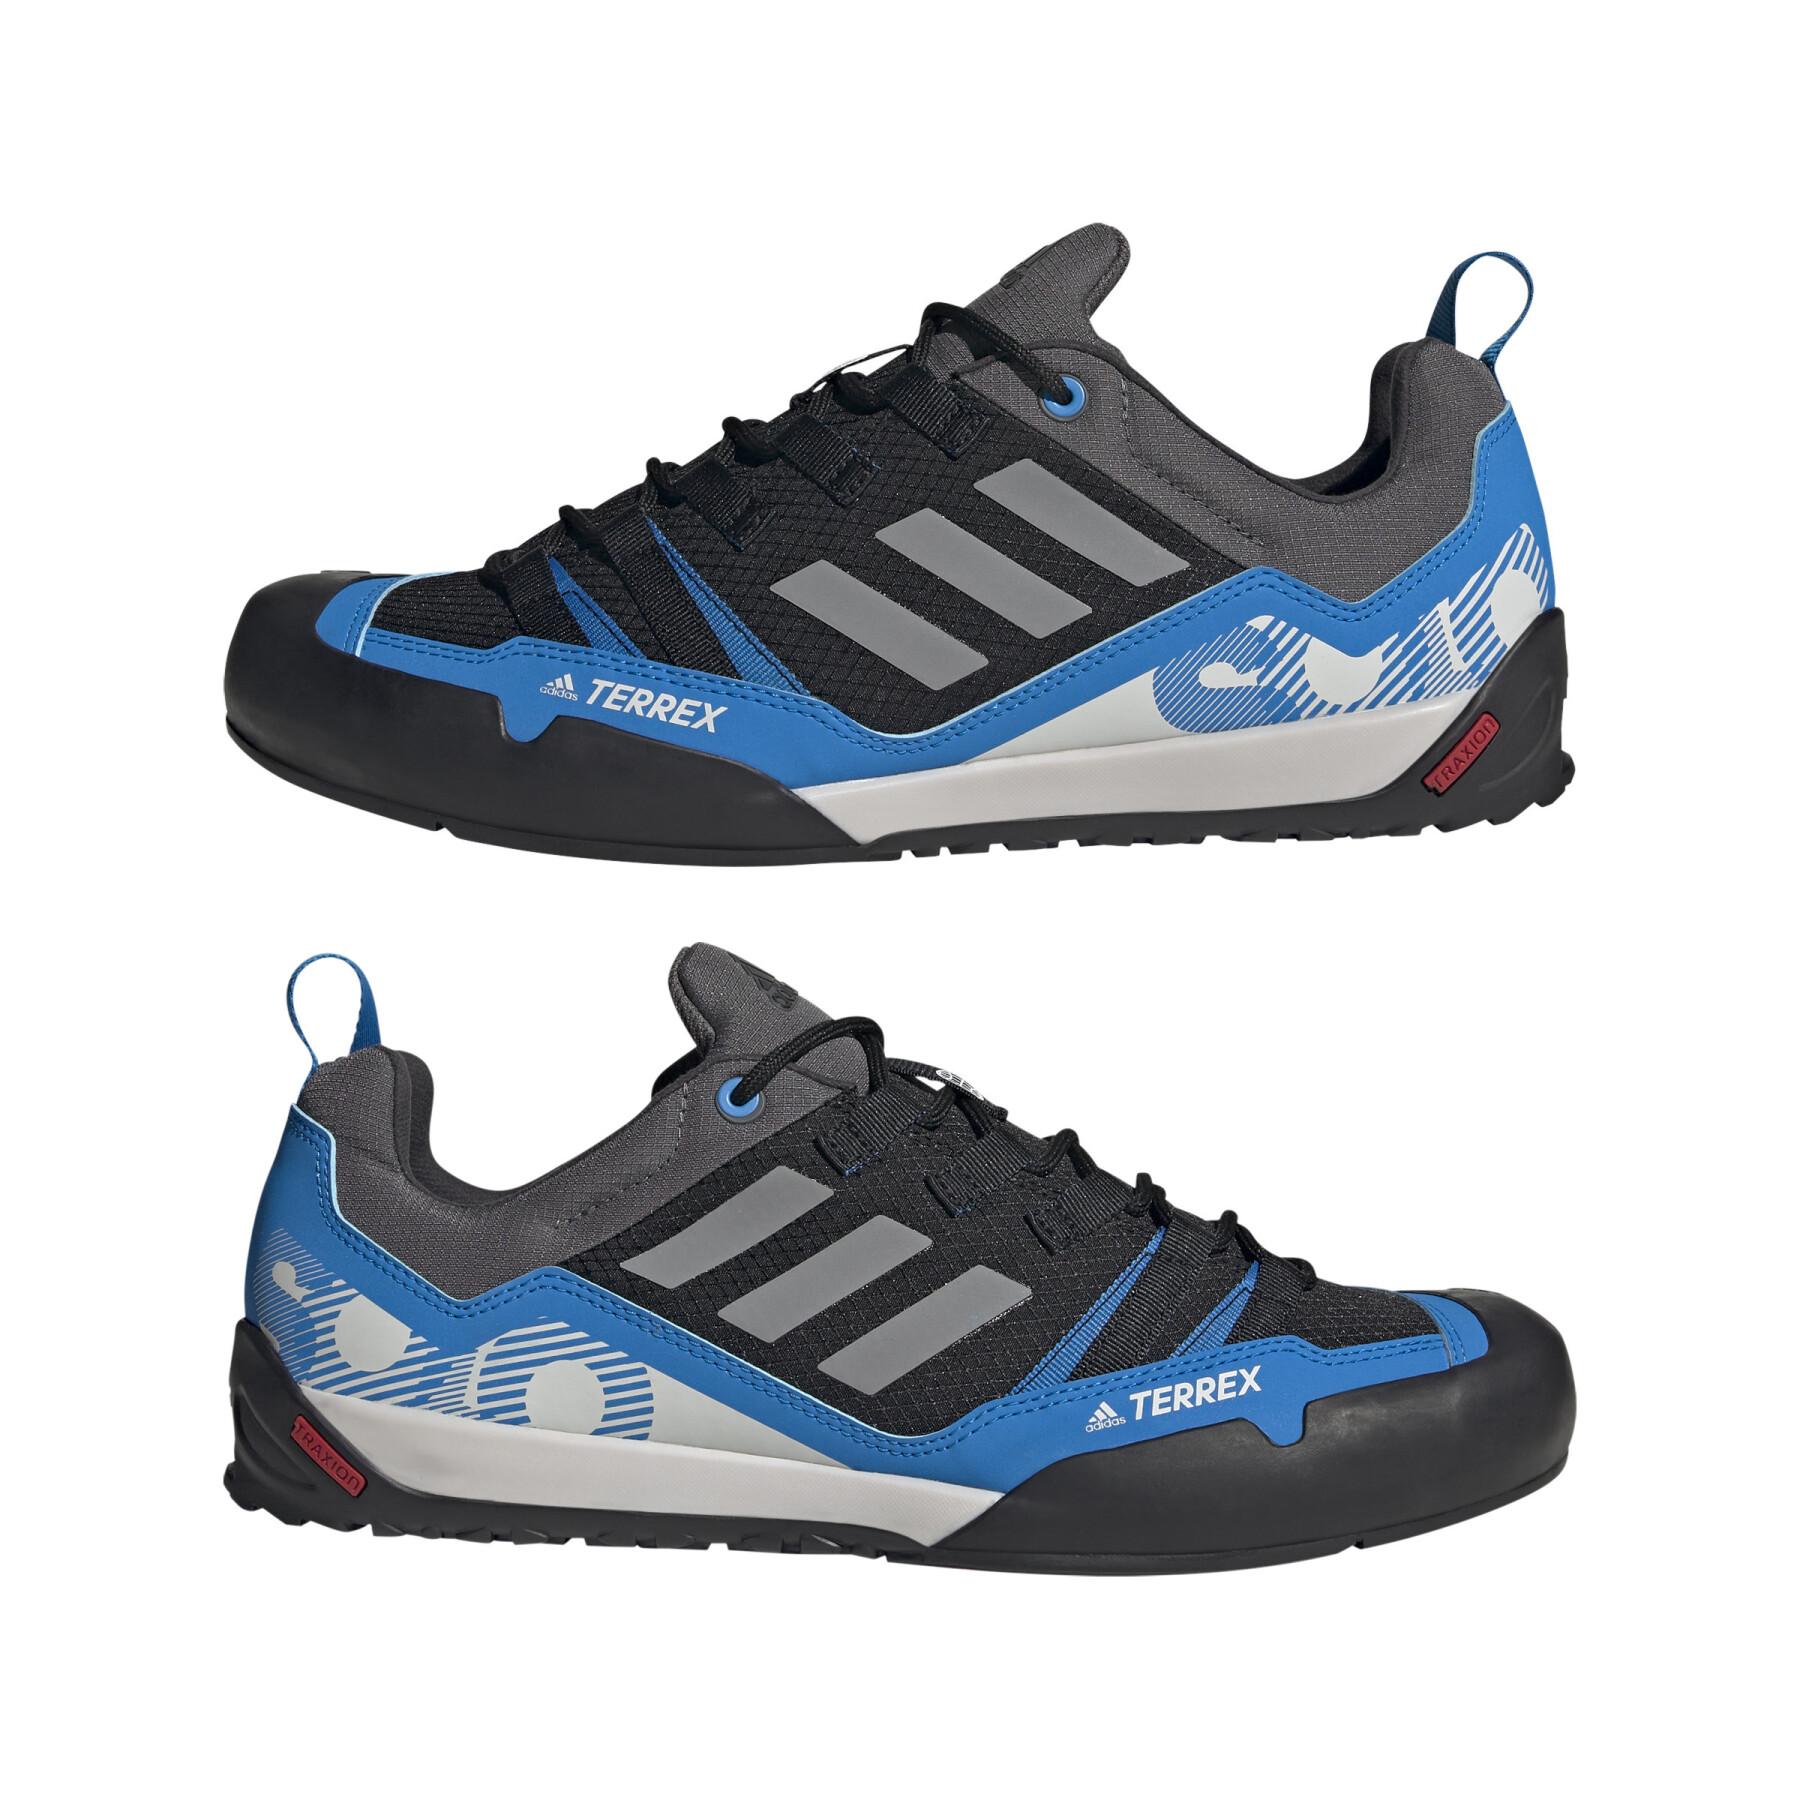 Hiking shoes adidas Terrex Swift Solo Approach